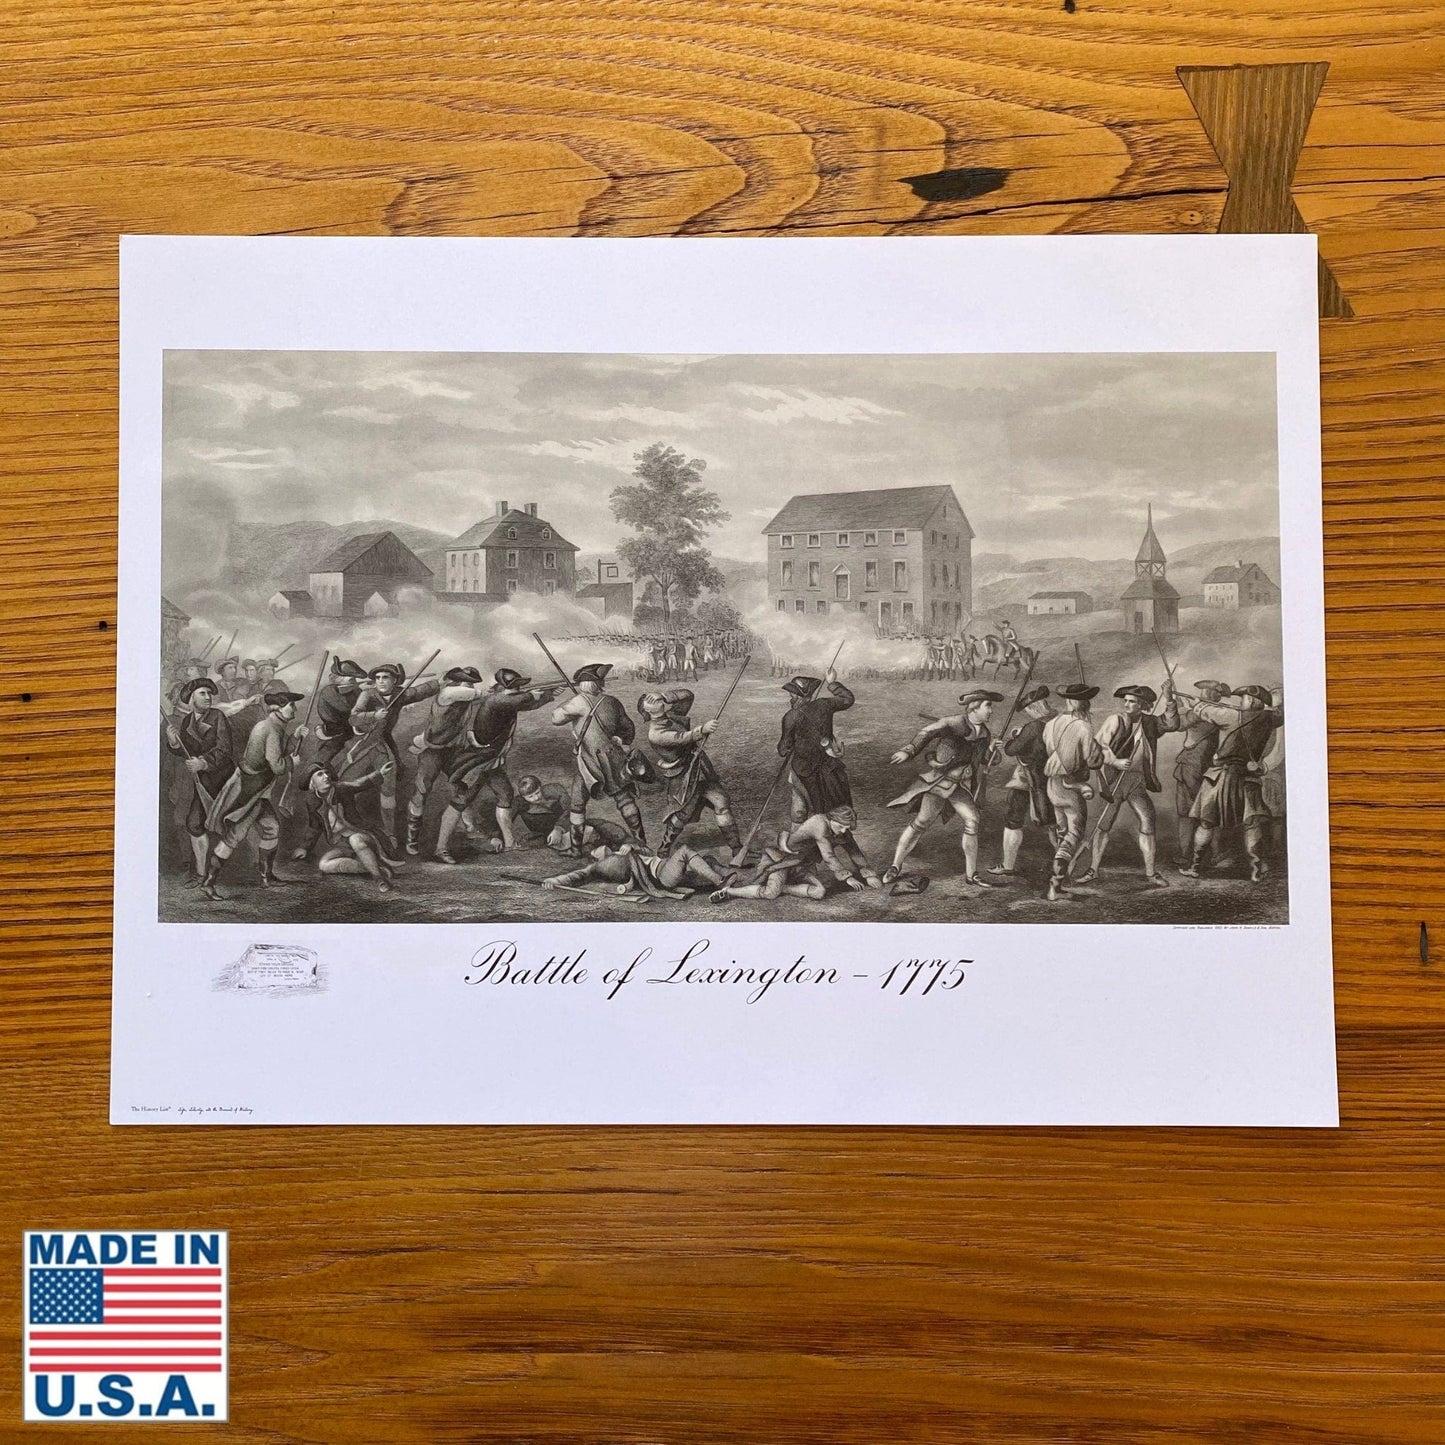 "Battle of Lexington 1775" small poster from the History List Store